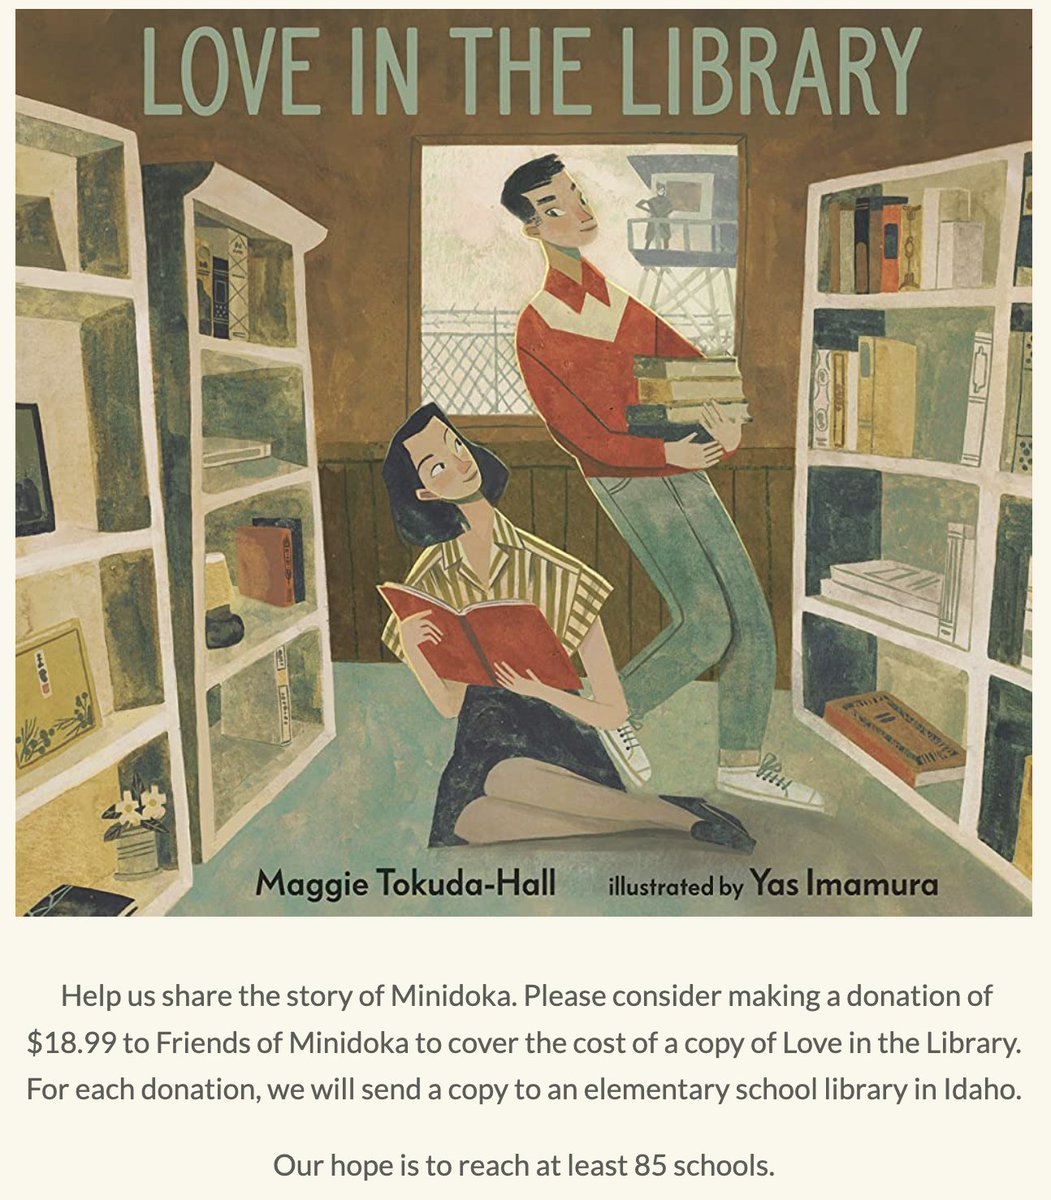 It's giving Tuesday and if you've still got gas in the tank, can I please offer up that Friends of Minidoka is donating copies of LOVE IN THE LIBRARY purchased through them to schools in Idaho, where the book takes place? minidoka.org/love-in-the-li…